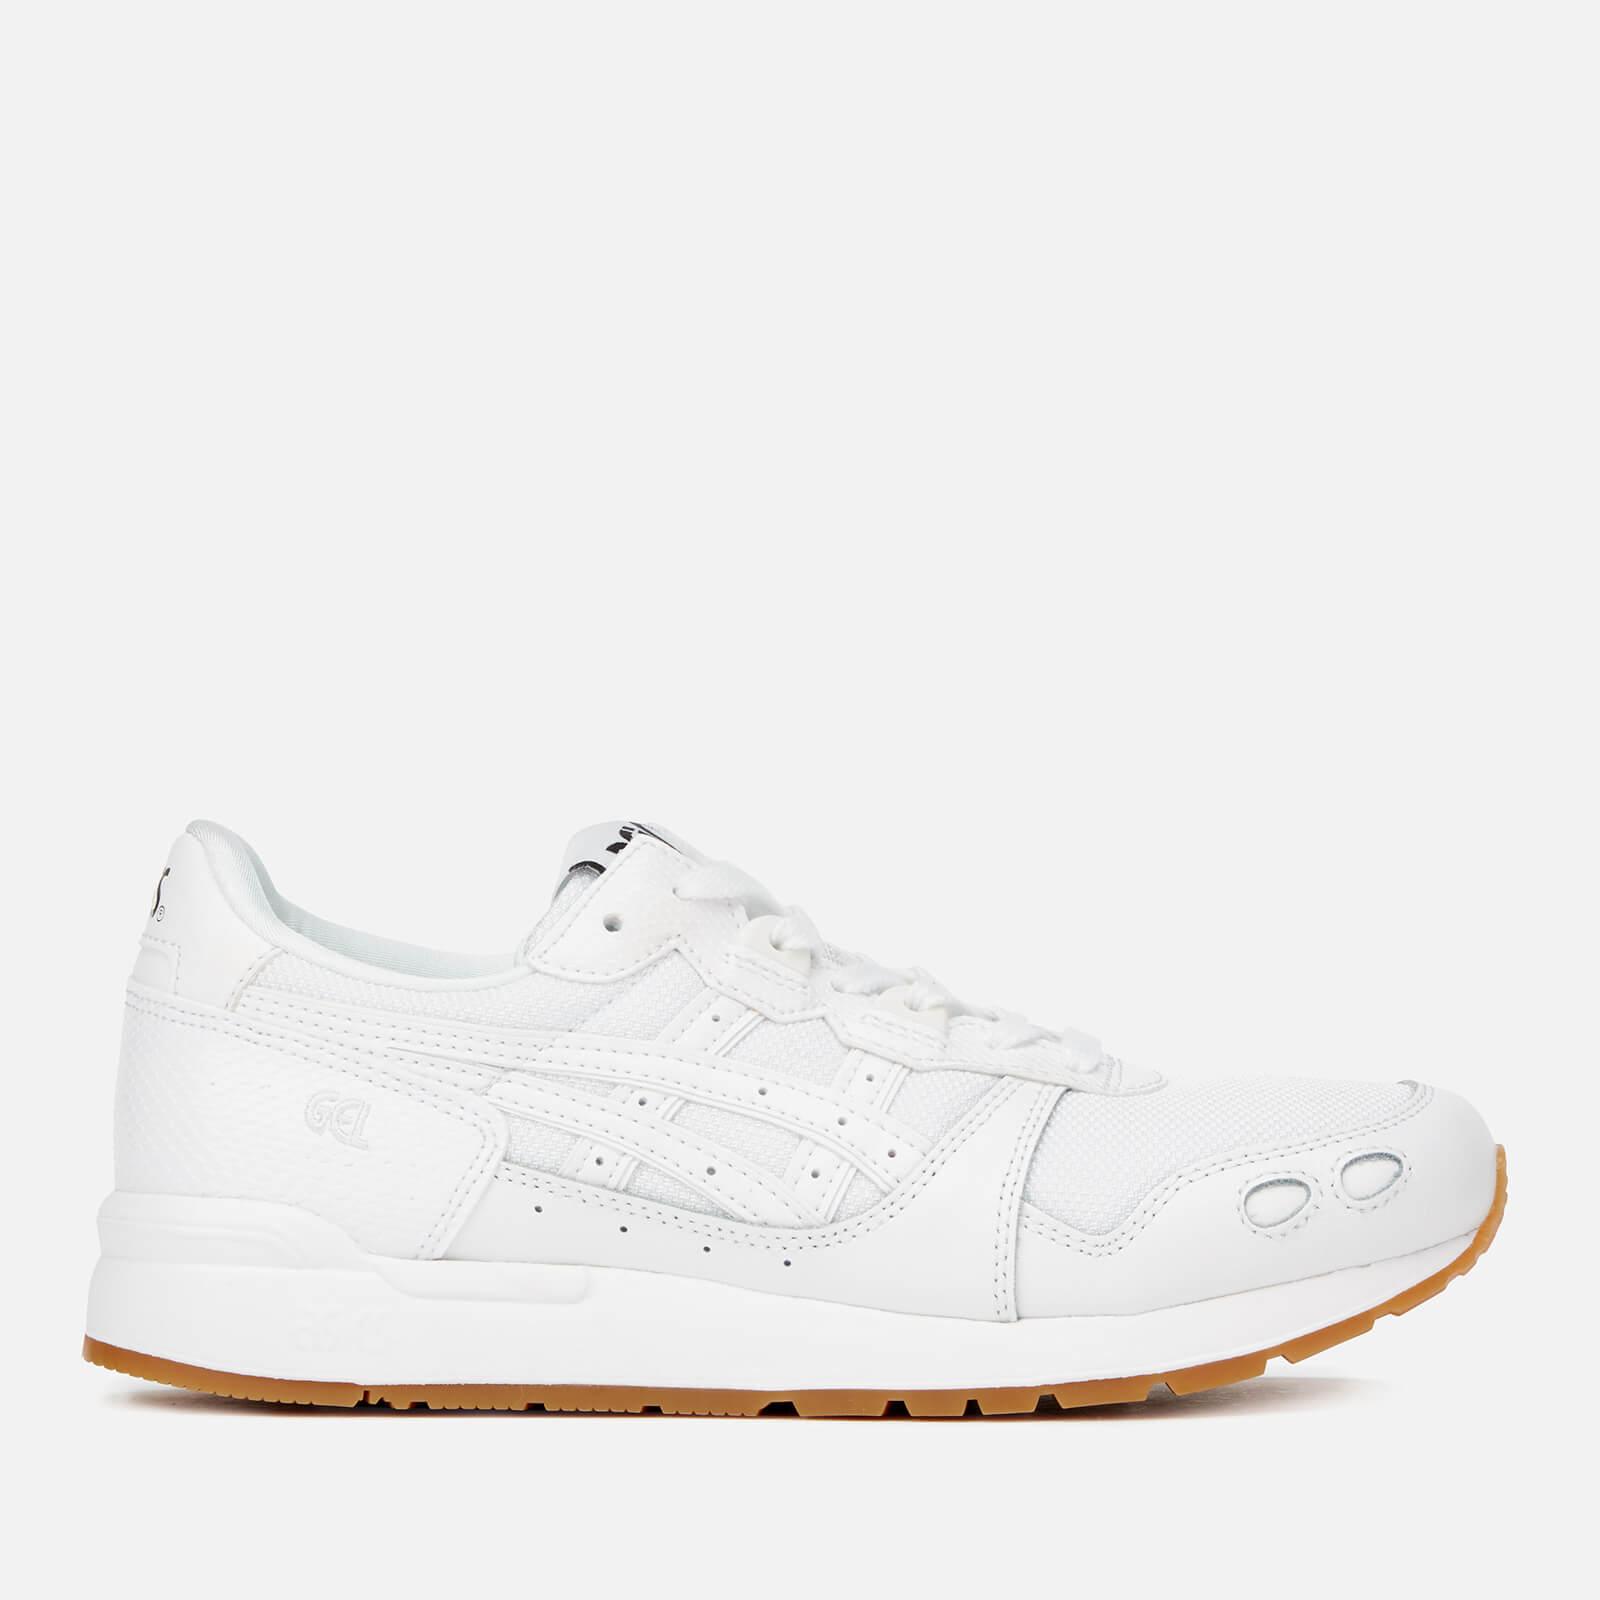 Asics Lifestyle Gel-lyte Runner Trainers in White - Lyst